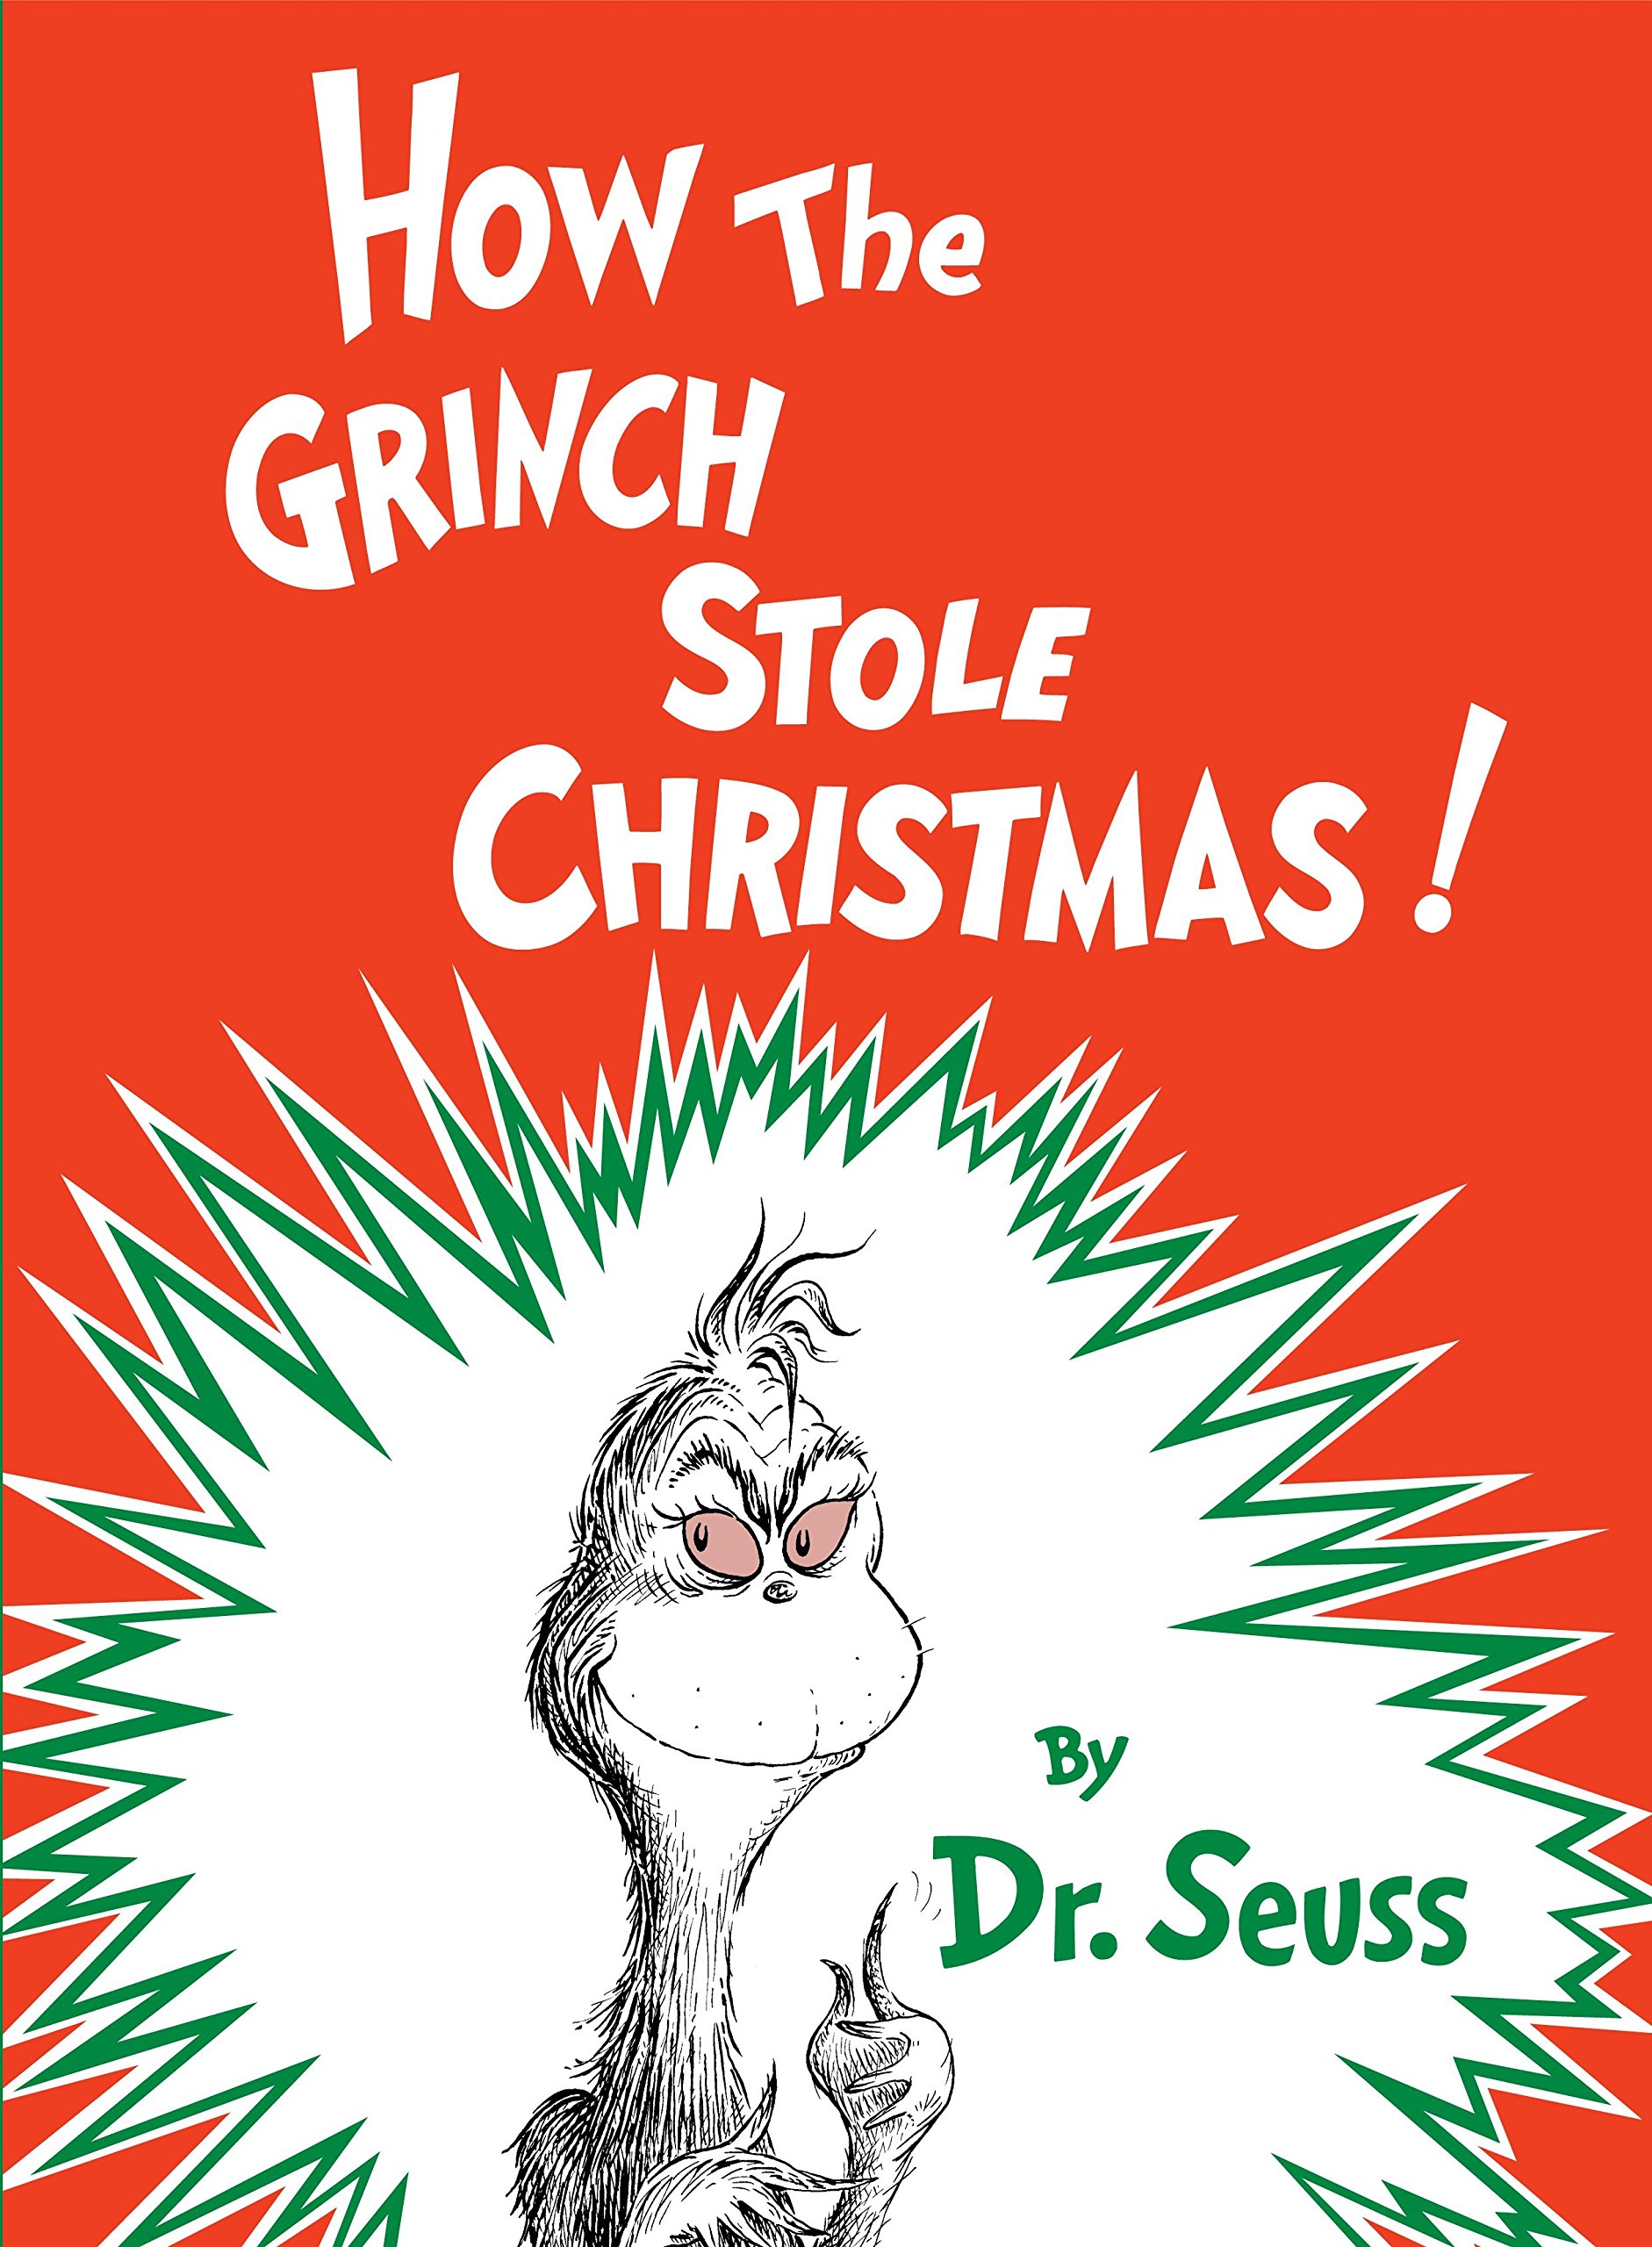 "How the Grinch Stole Christmas" book cover